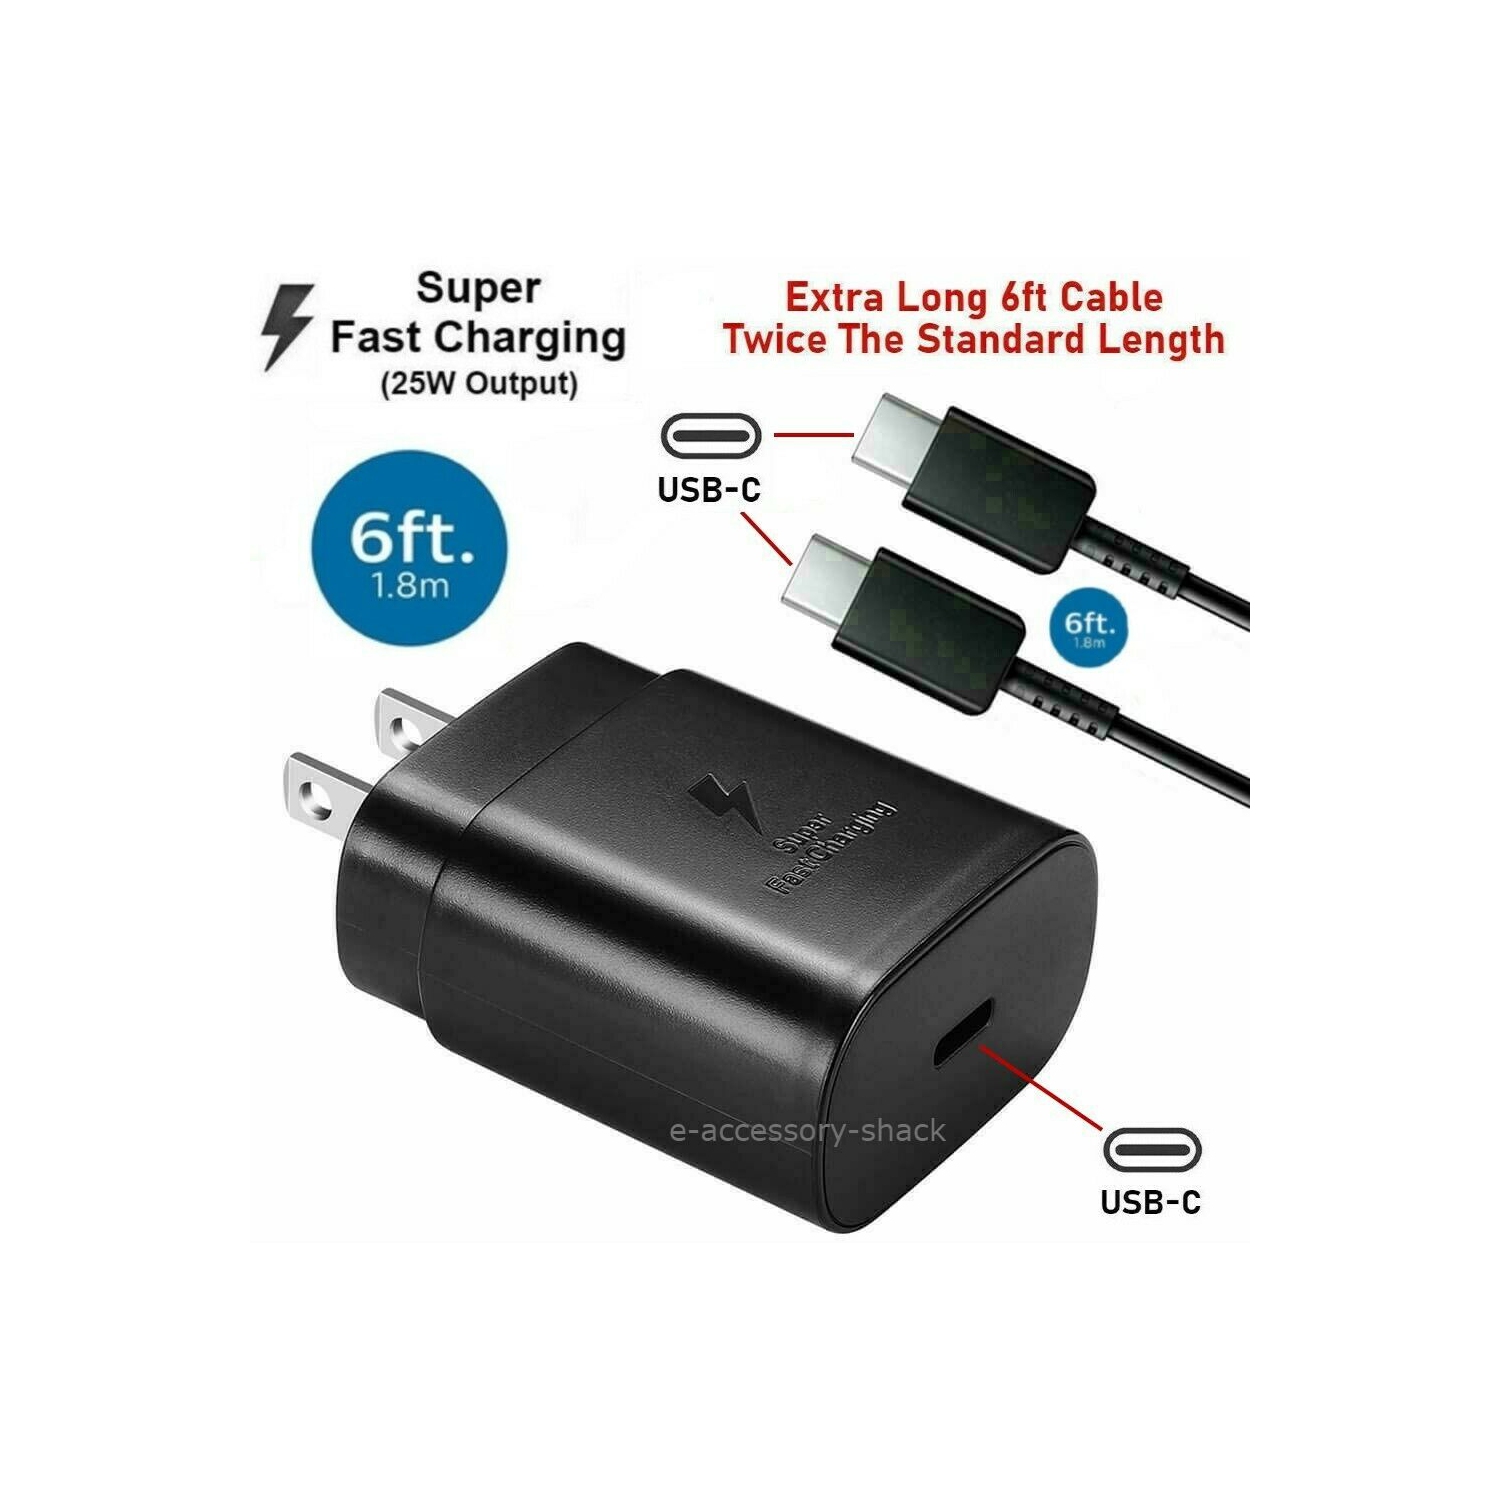 |GA| 25w Type USB-C Super Fast Wall Charger+6FT/2M Cable| For Samsung Galaxy S20 S21 5G Note 10 & Note 20